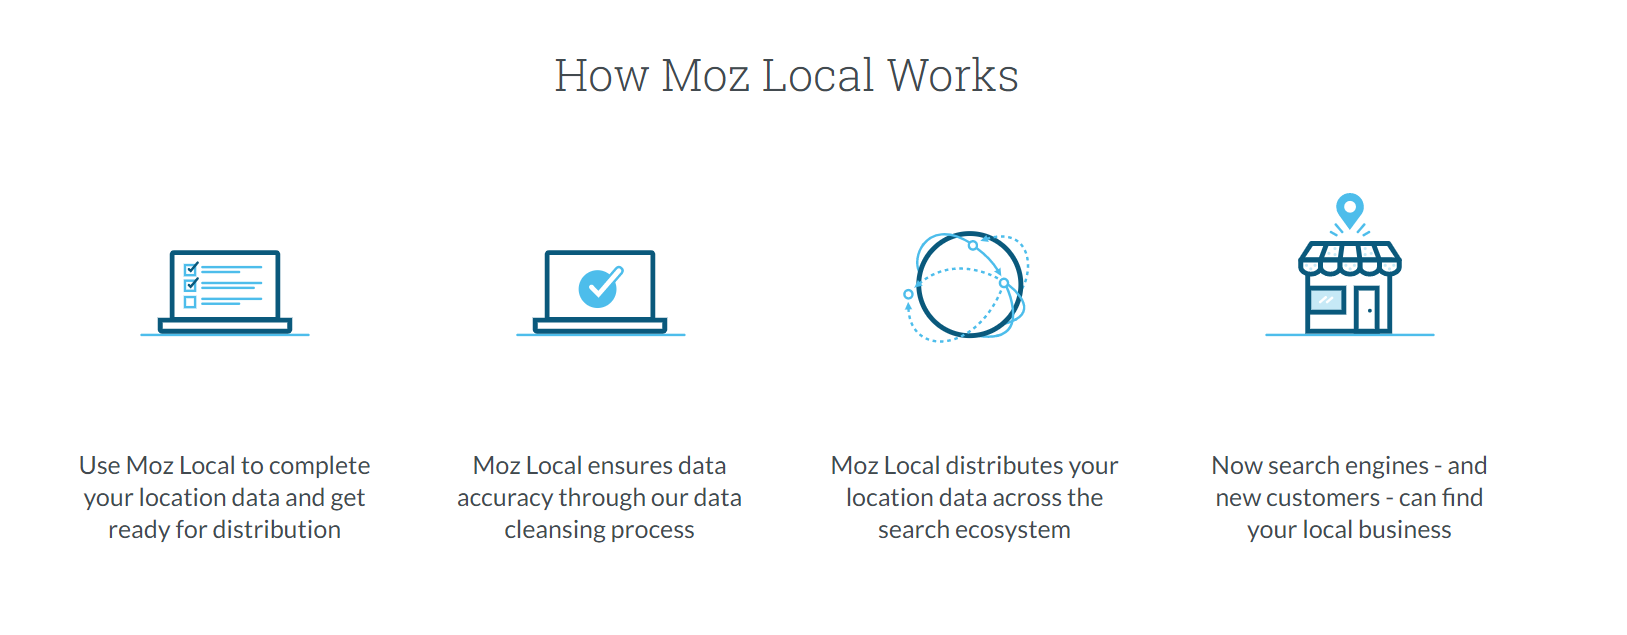 A local SEO company should use a reputable software like Moz Local for citations